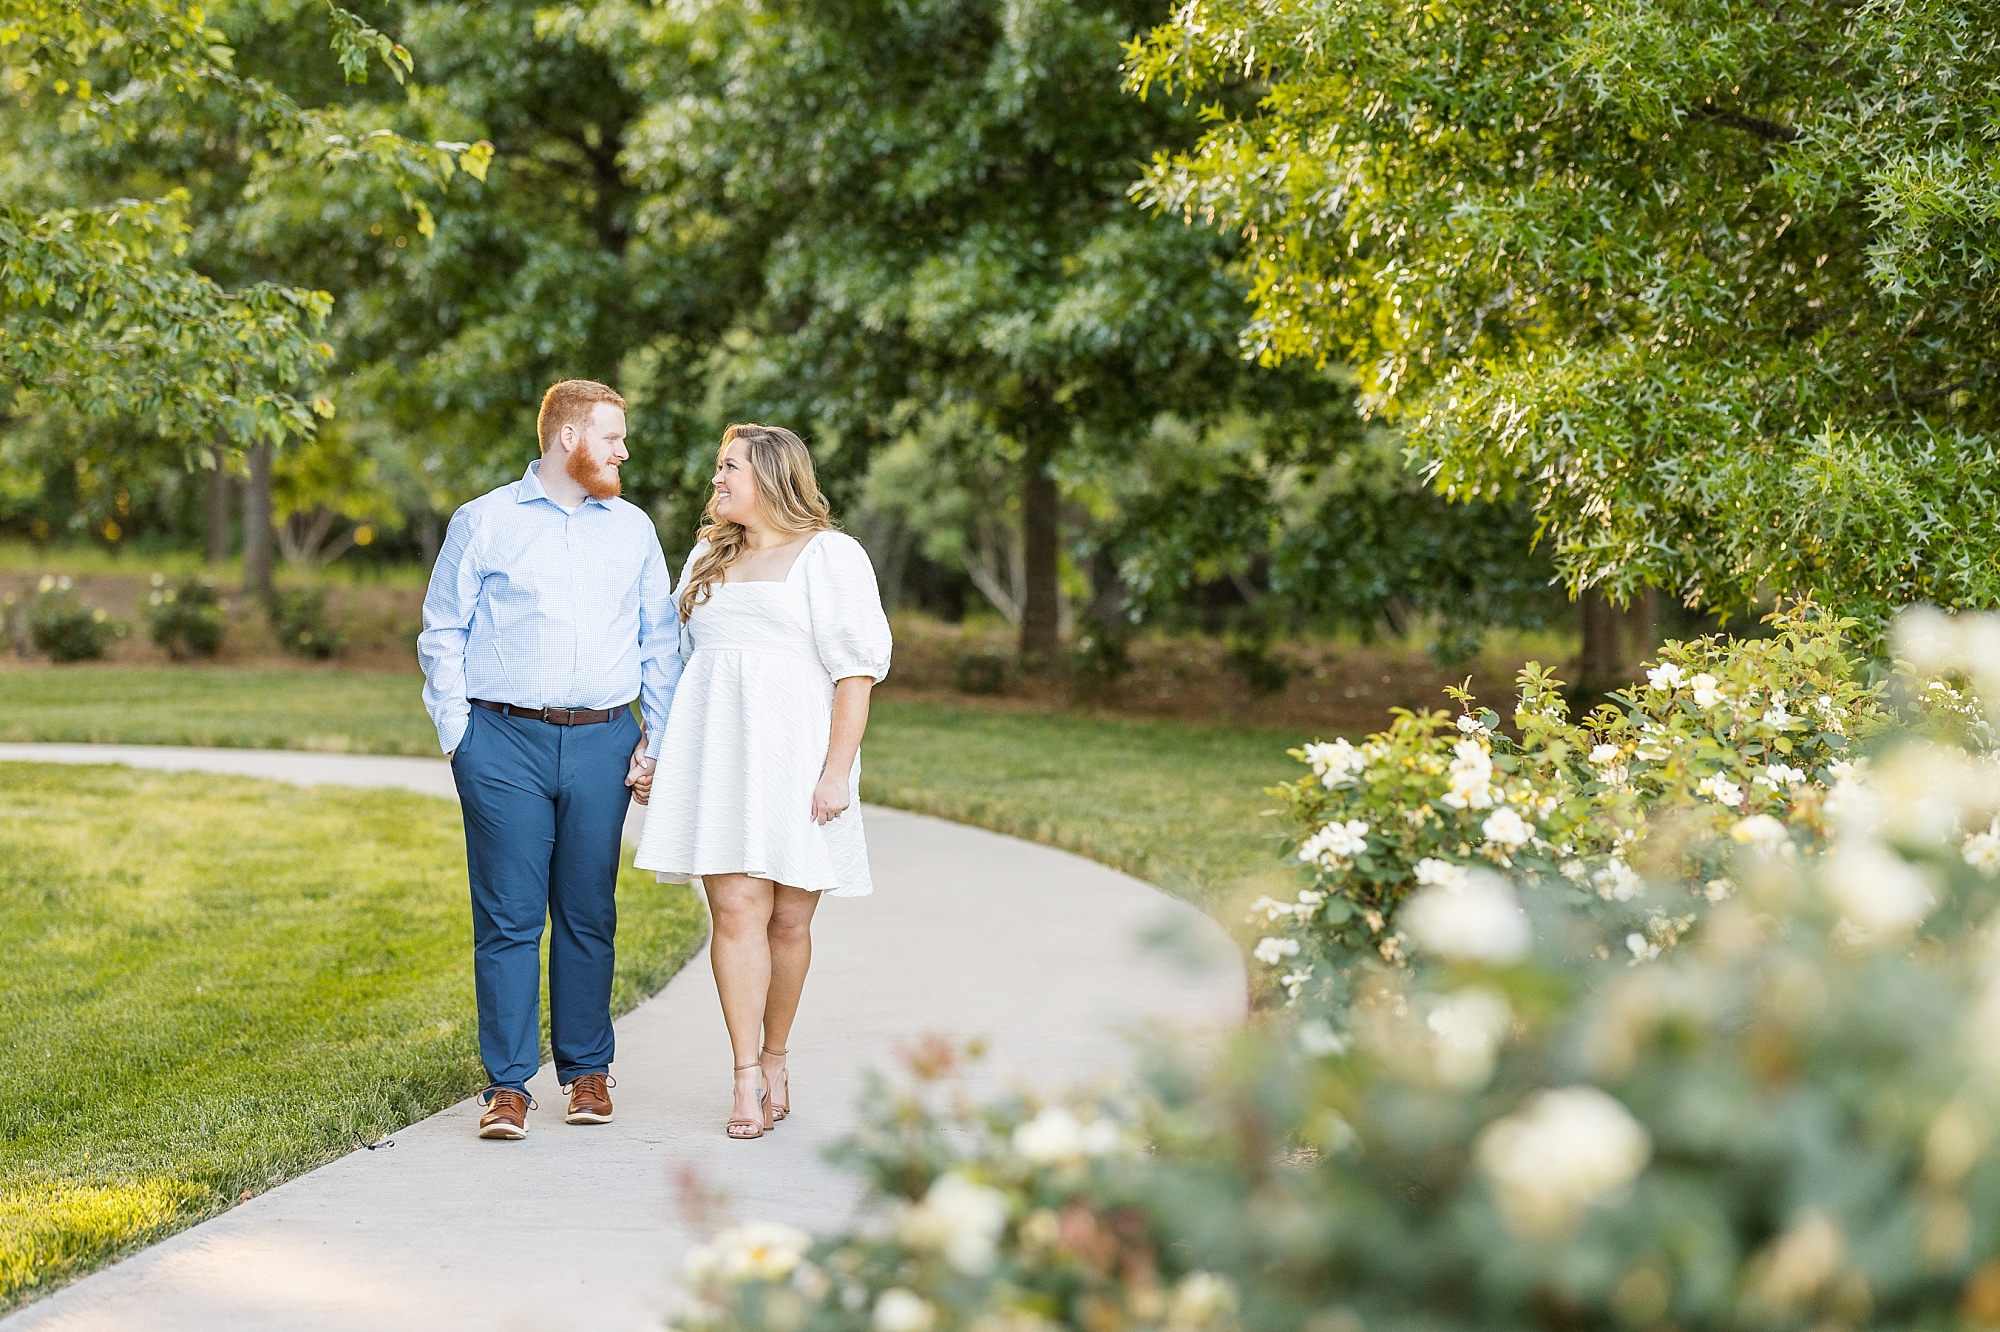 Beautiful spring engagement photo with flowers in a park in Raleigh | Raleigh NC Engagement Photographer